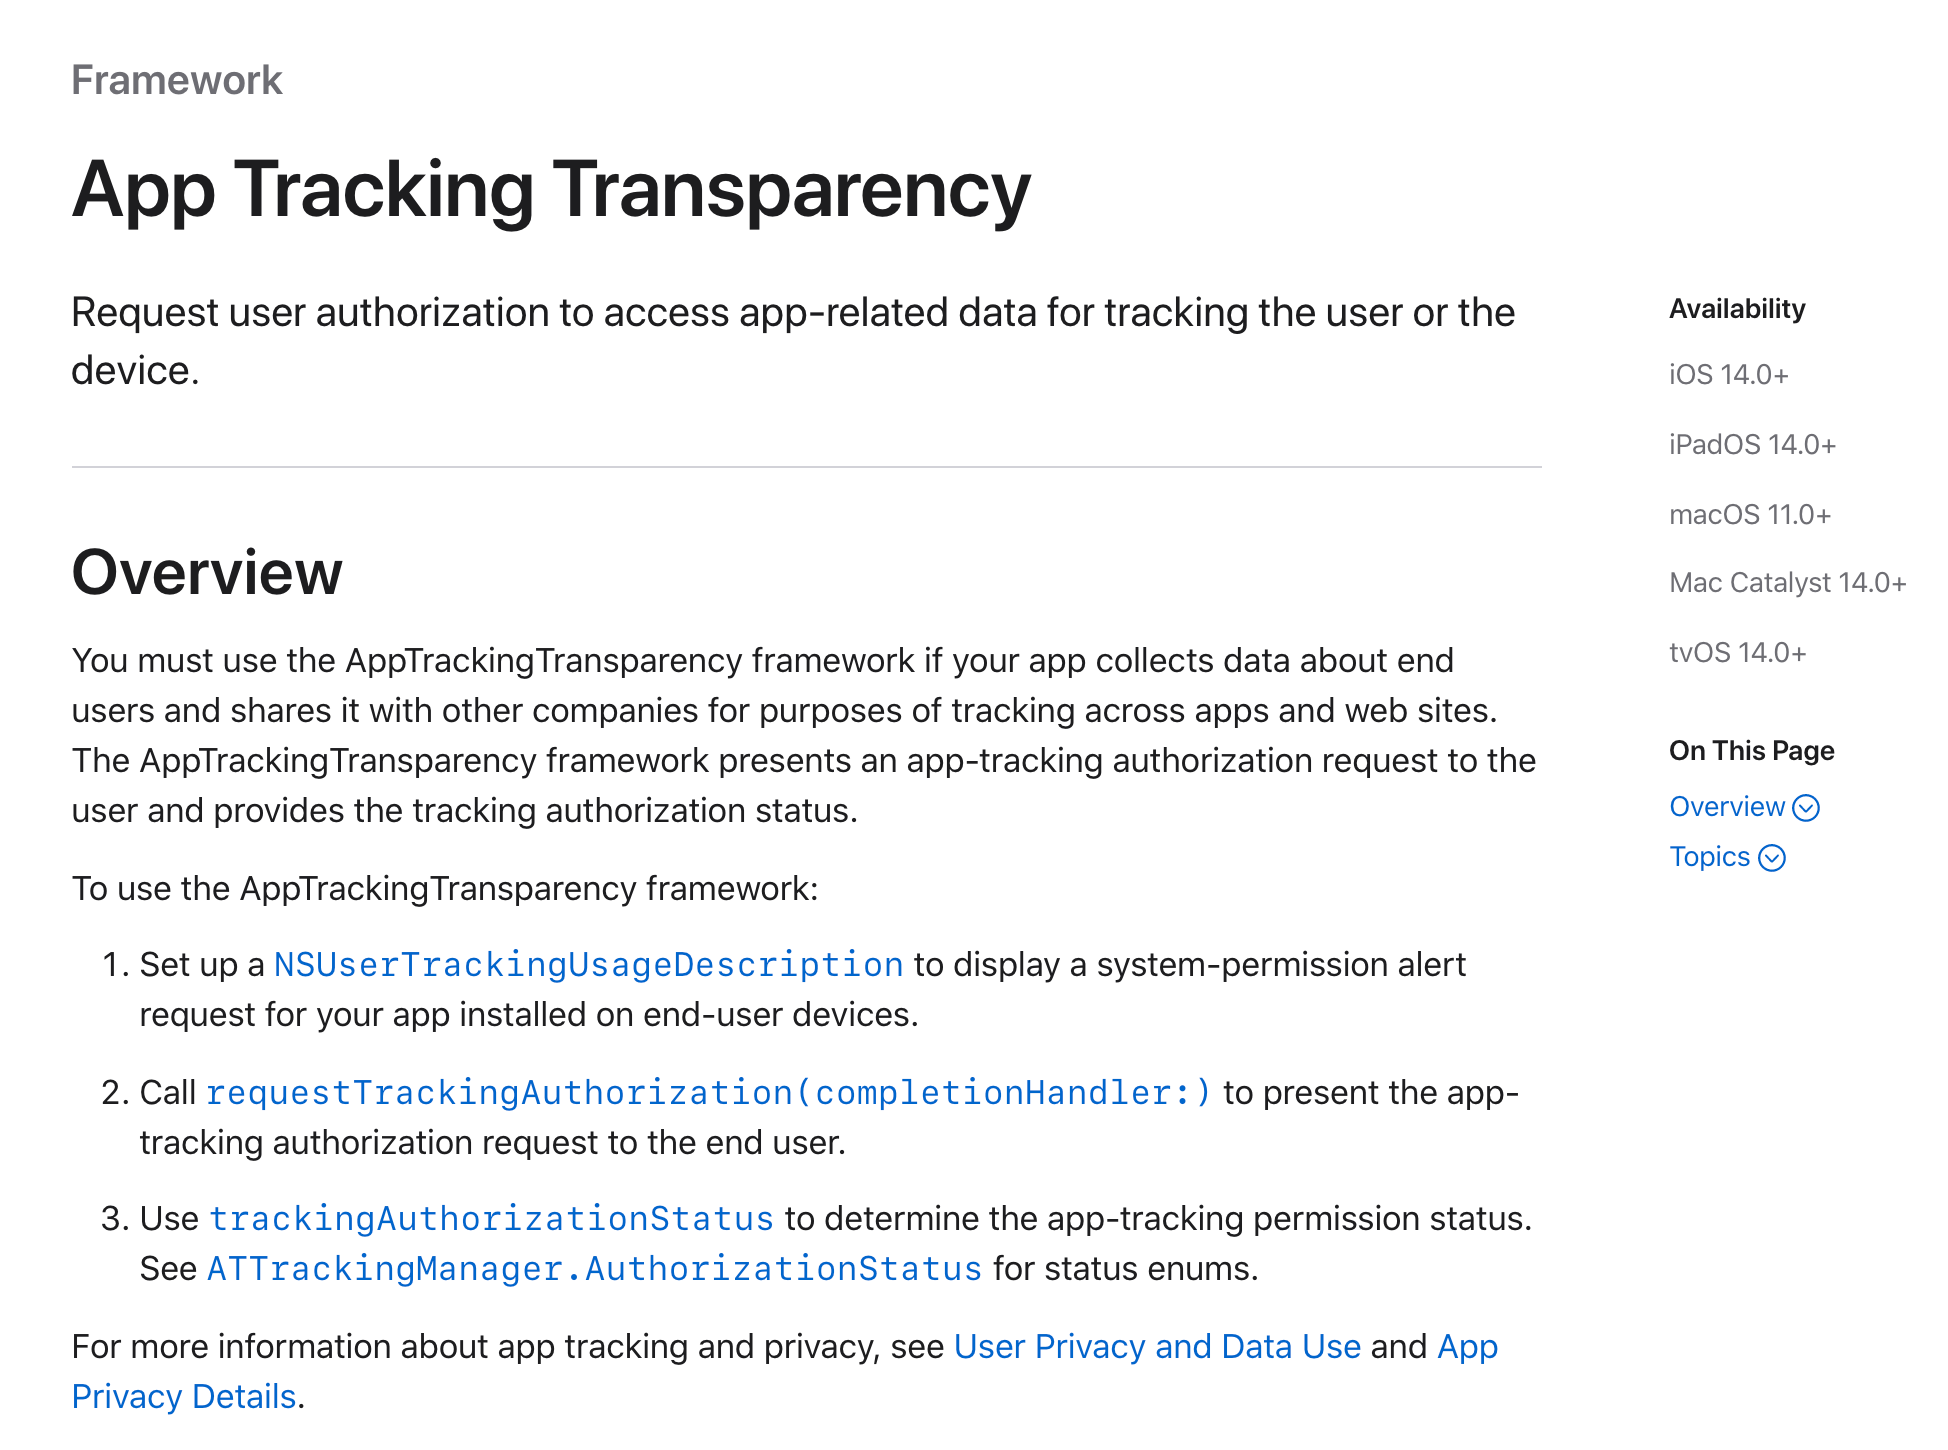 App tracking transparency